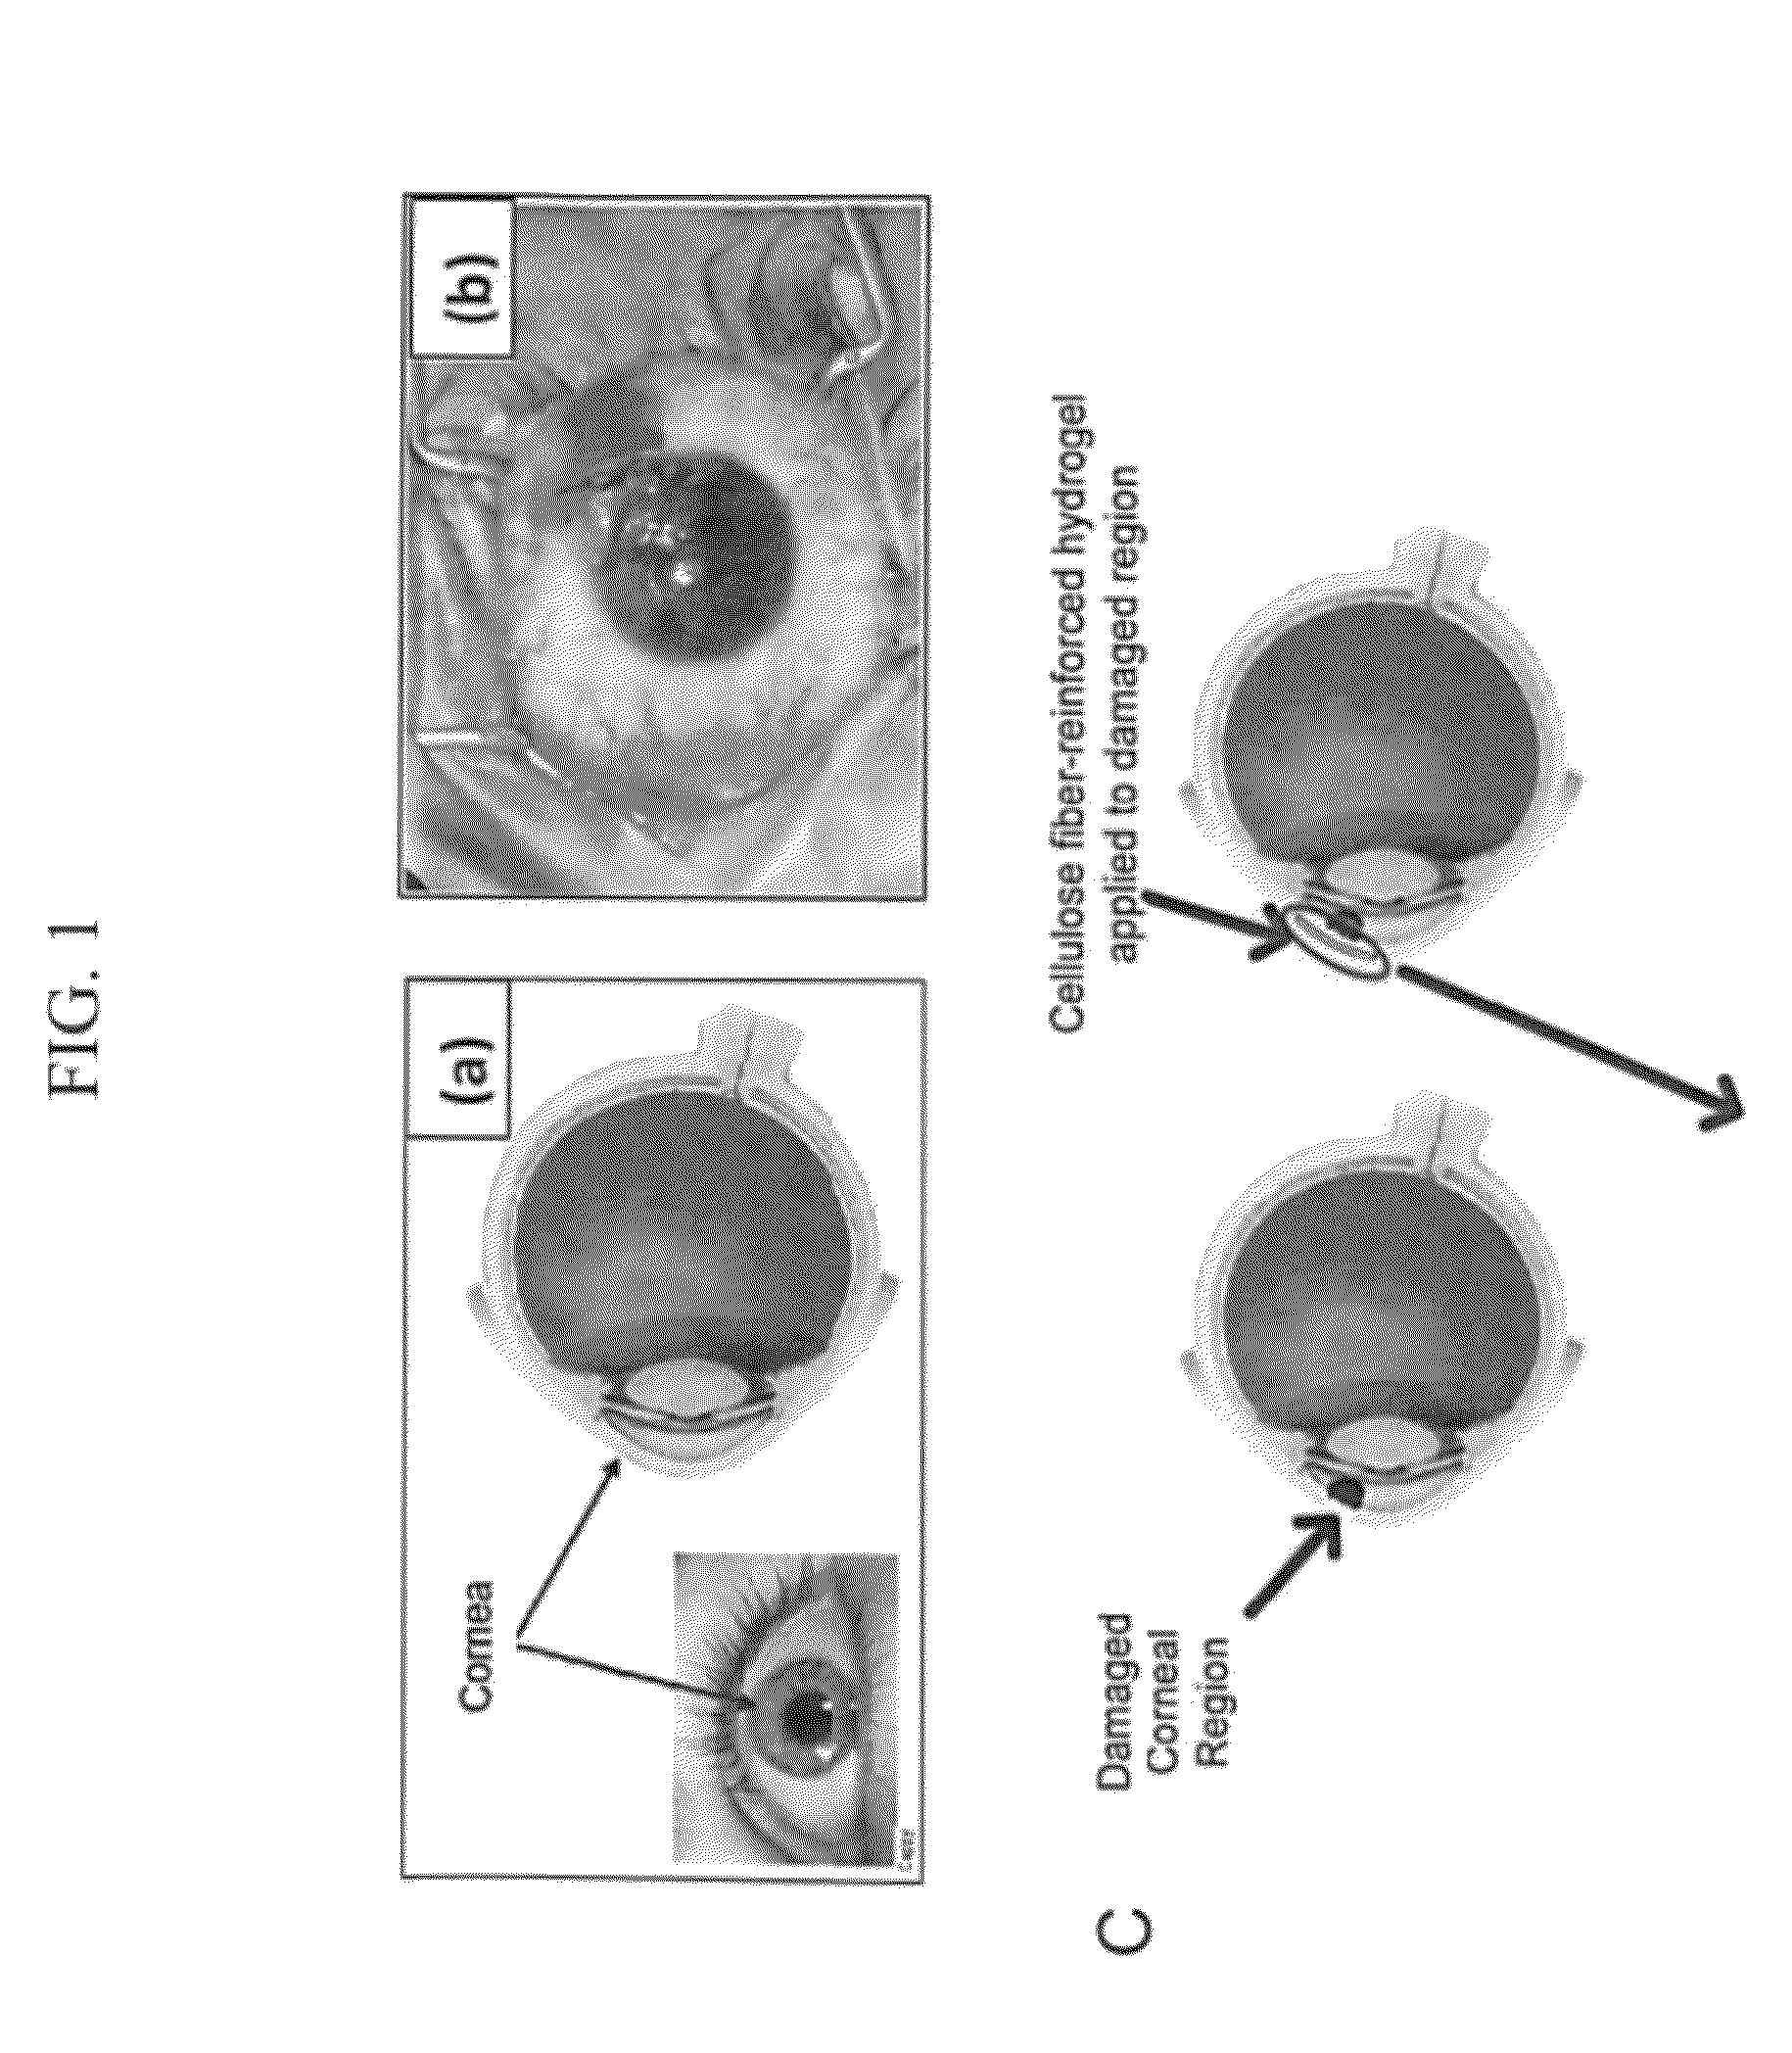 Wound healing compositions comprising biocompatible cellulose hydrogel membranes and methods of use thereof